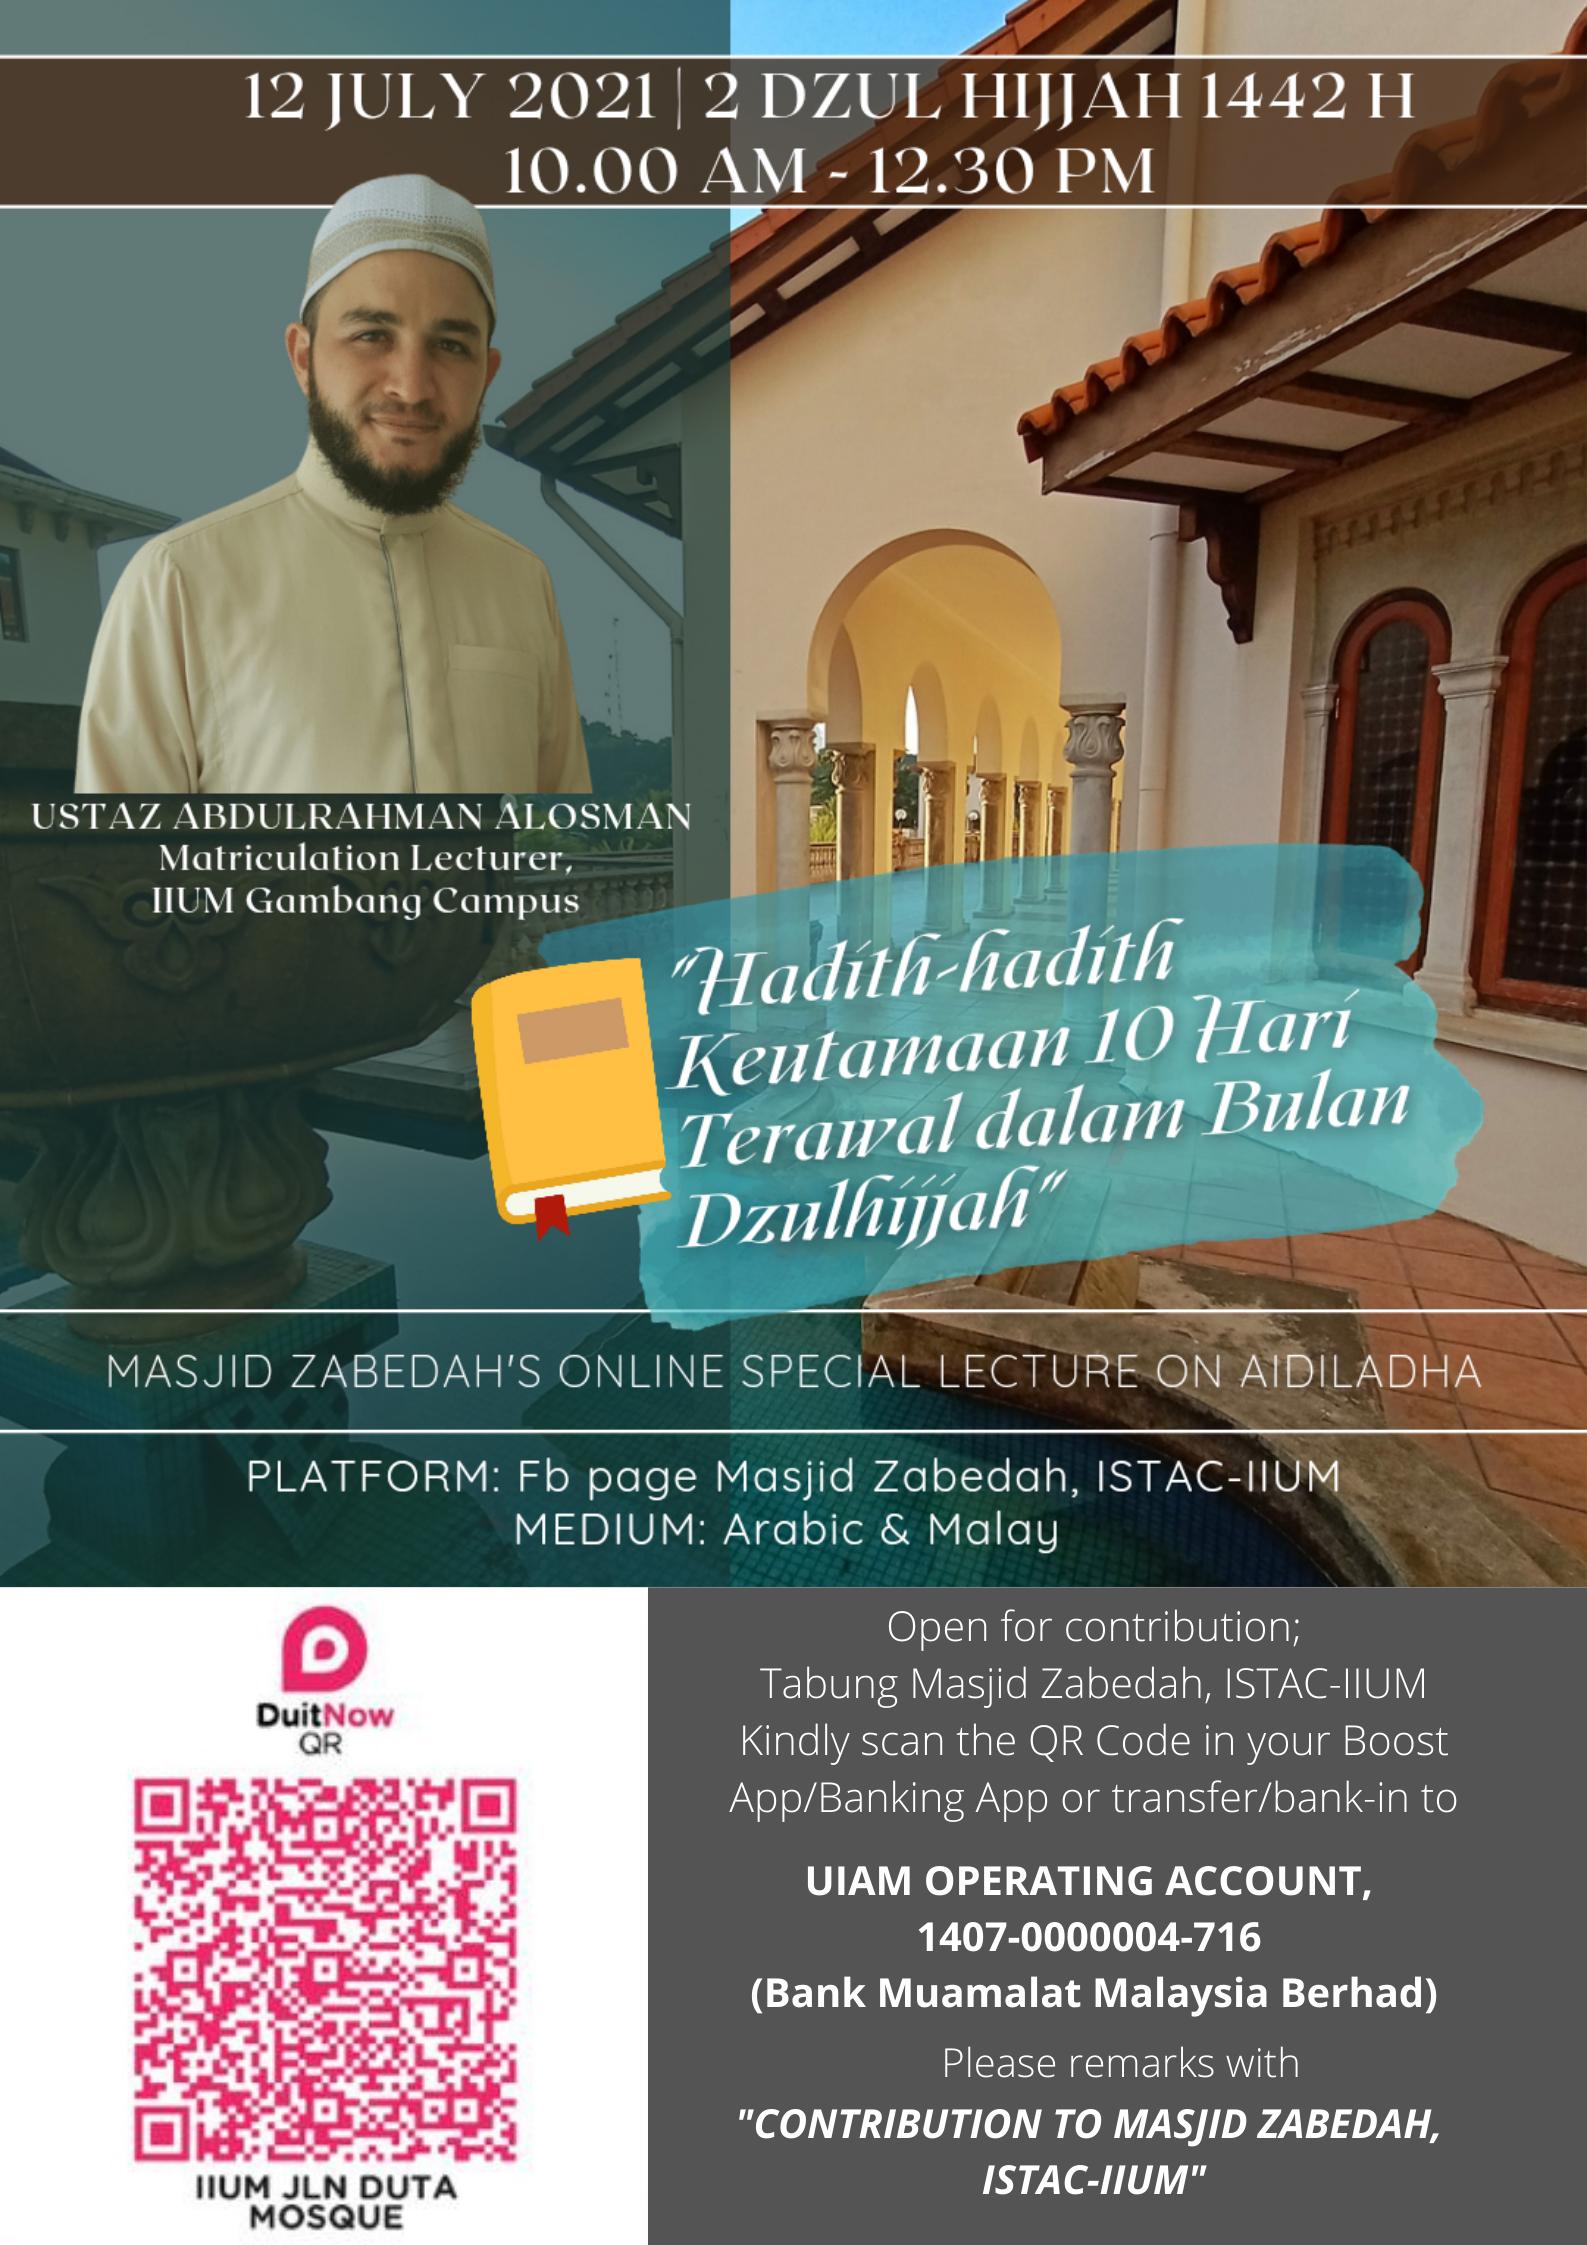 ONLINE SPECIAL LECTURE ON 'AID AL-ADHA